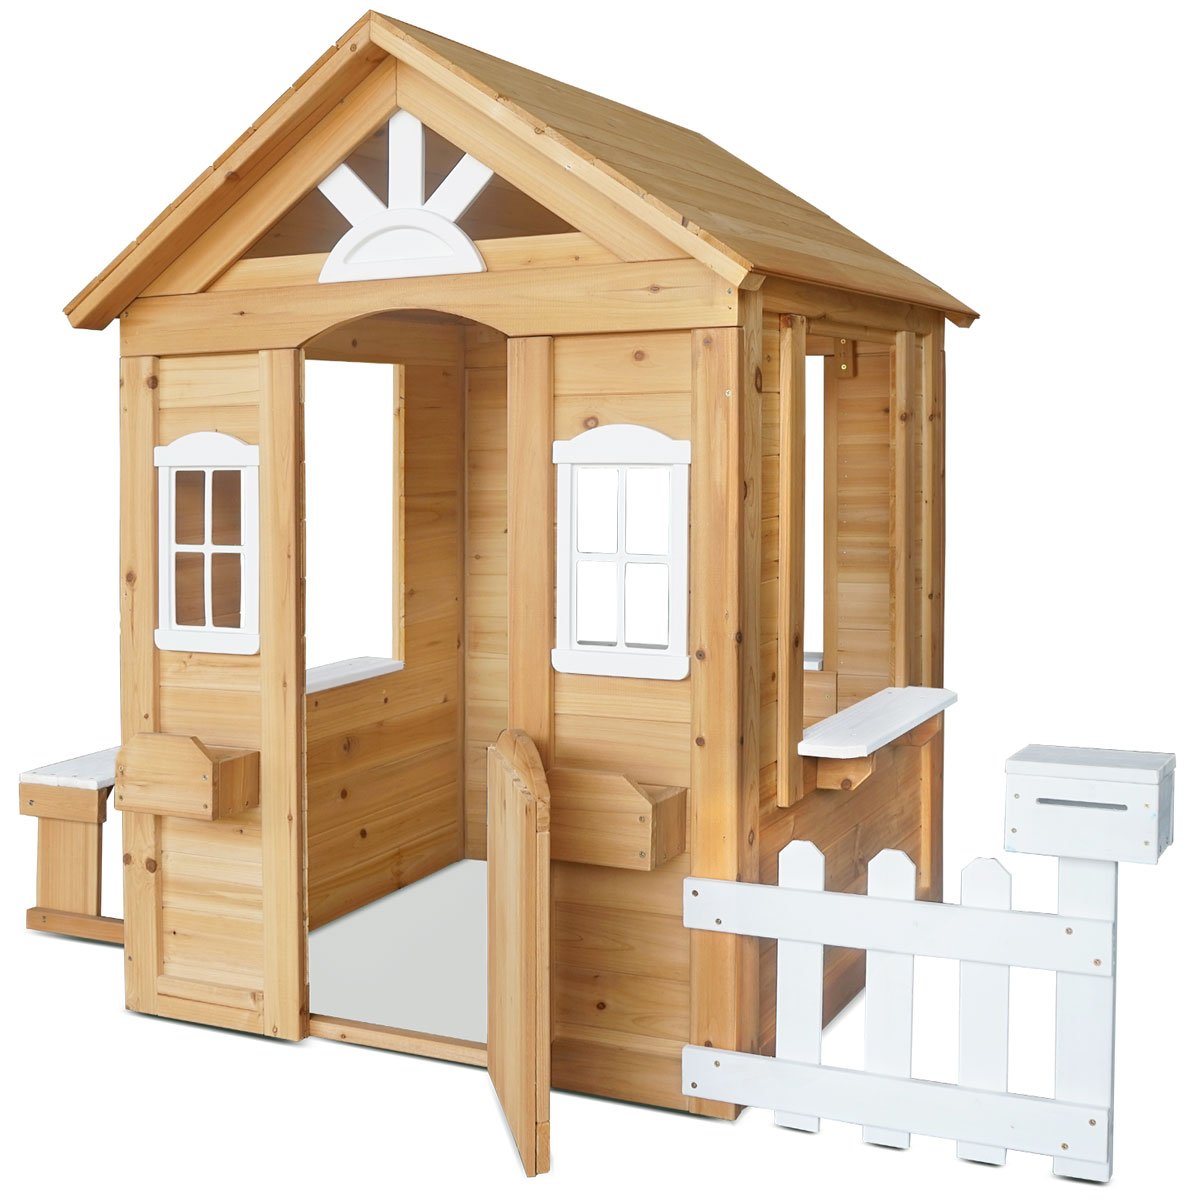 Lifespan Kids Teddy Cubby House in Natural Timber (V2)